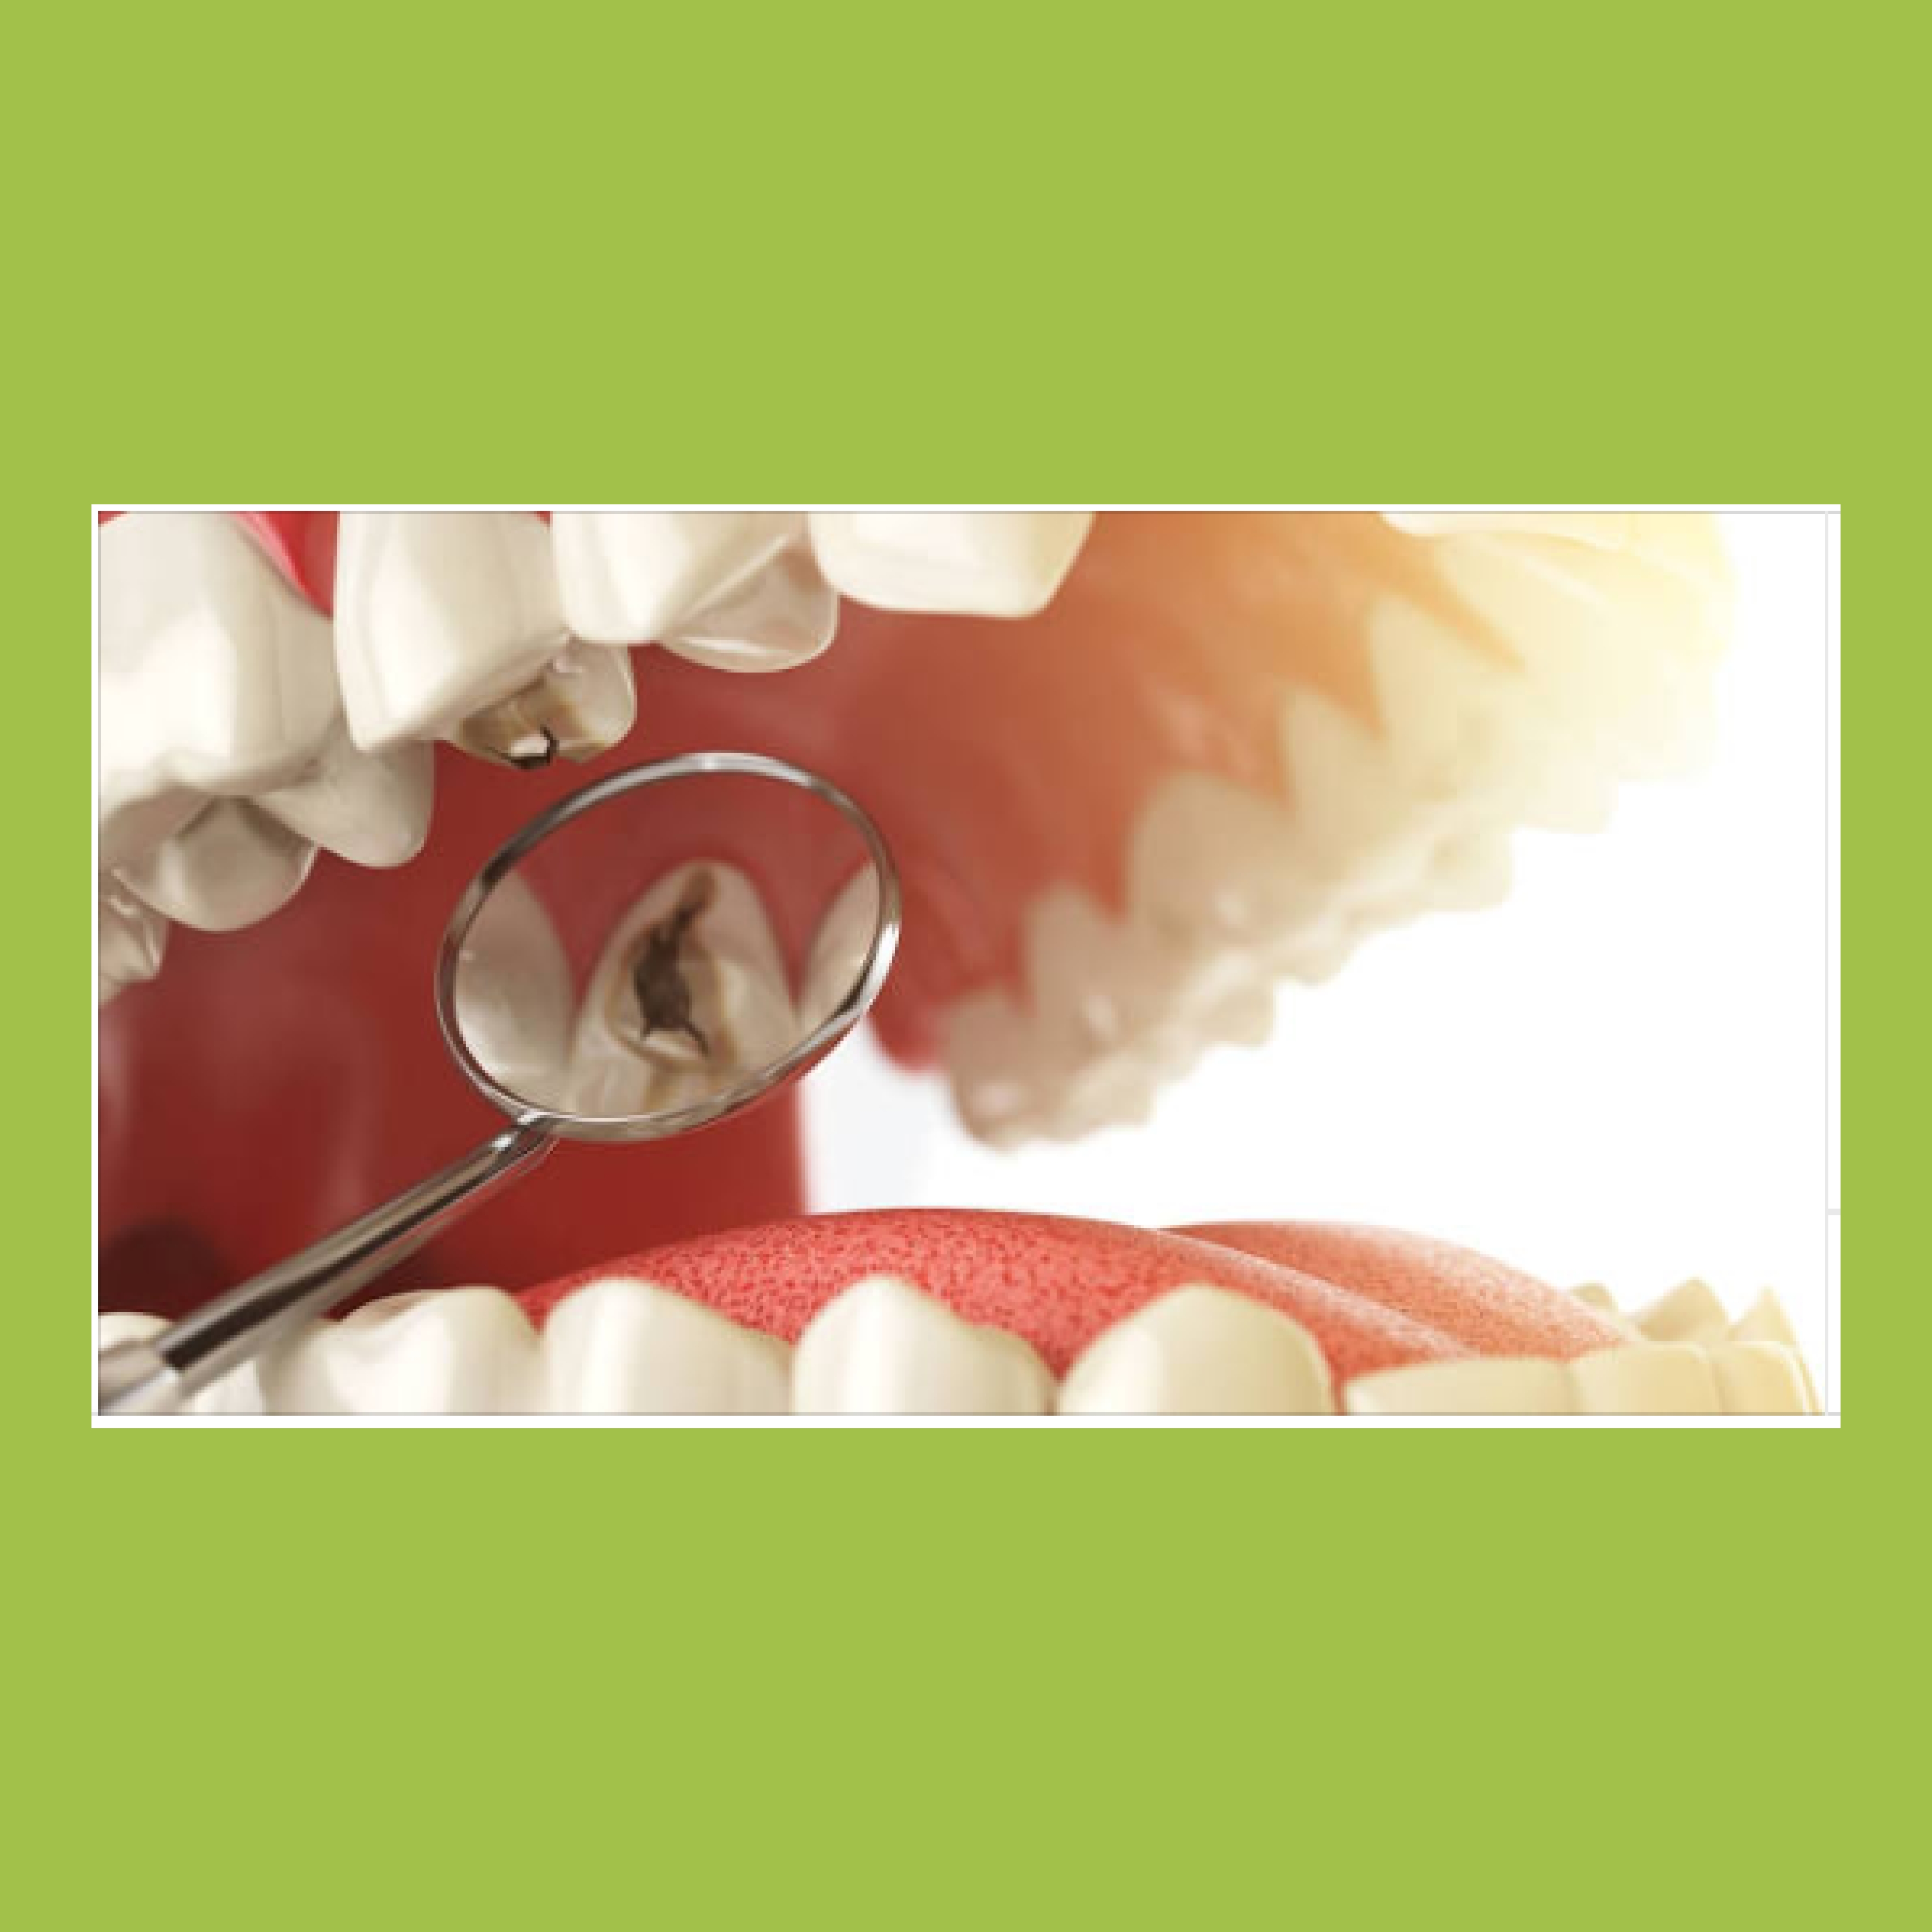 How to Beat Toothache and Other Tooth Diseases: Best Tips 4 Better Oral Hygiene.